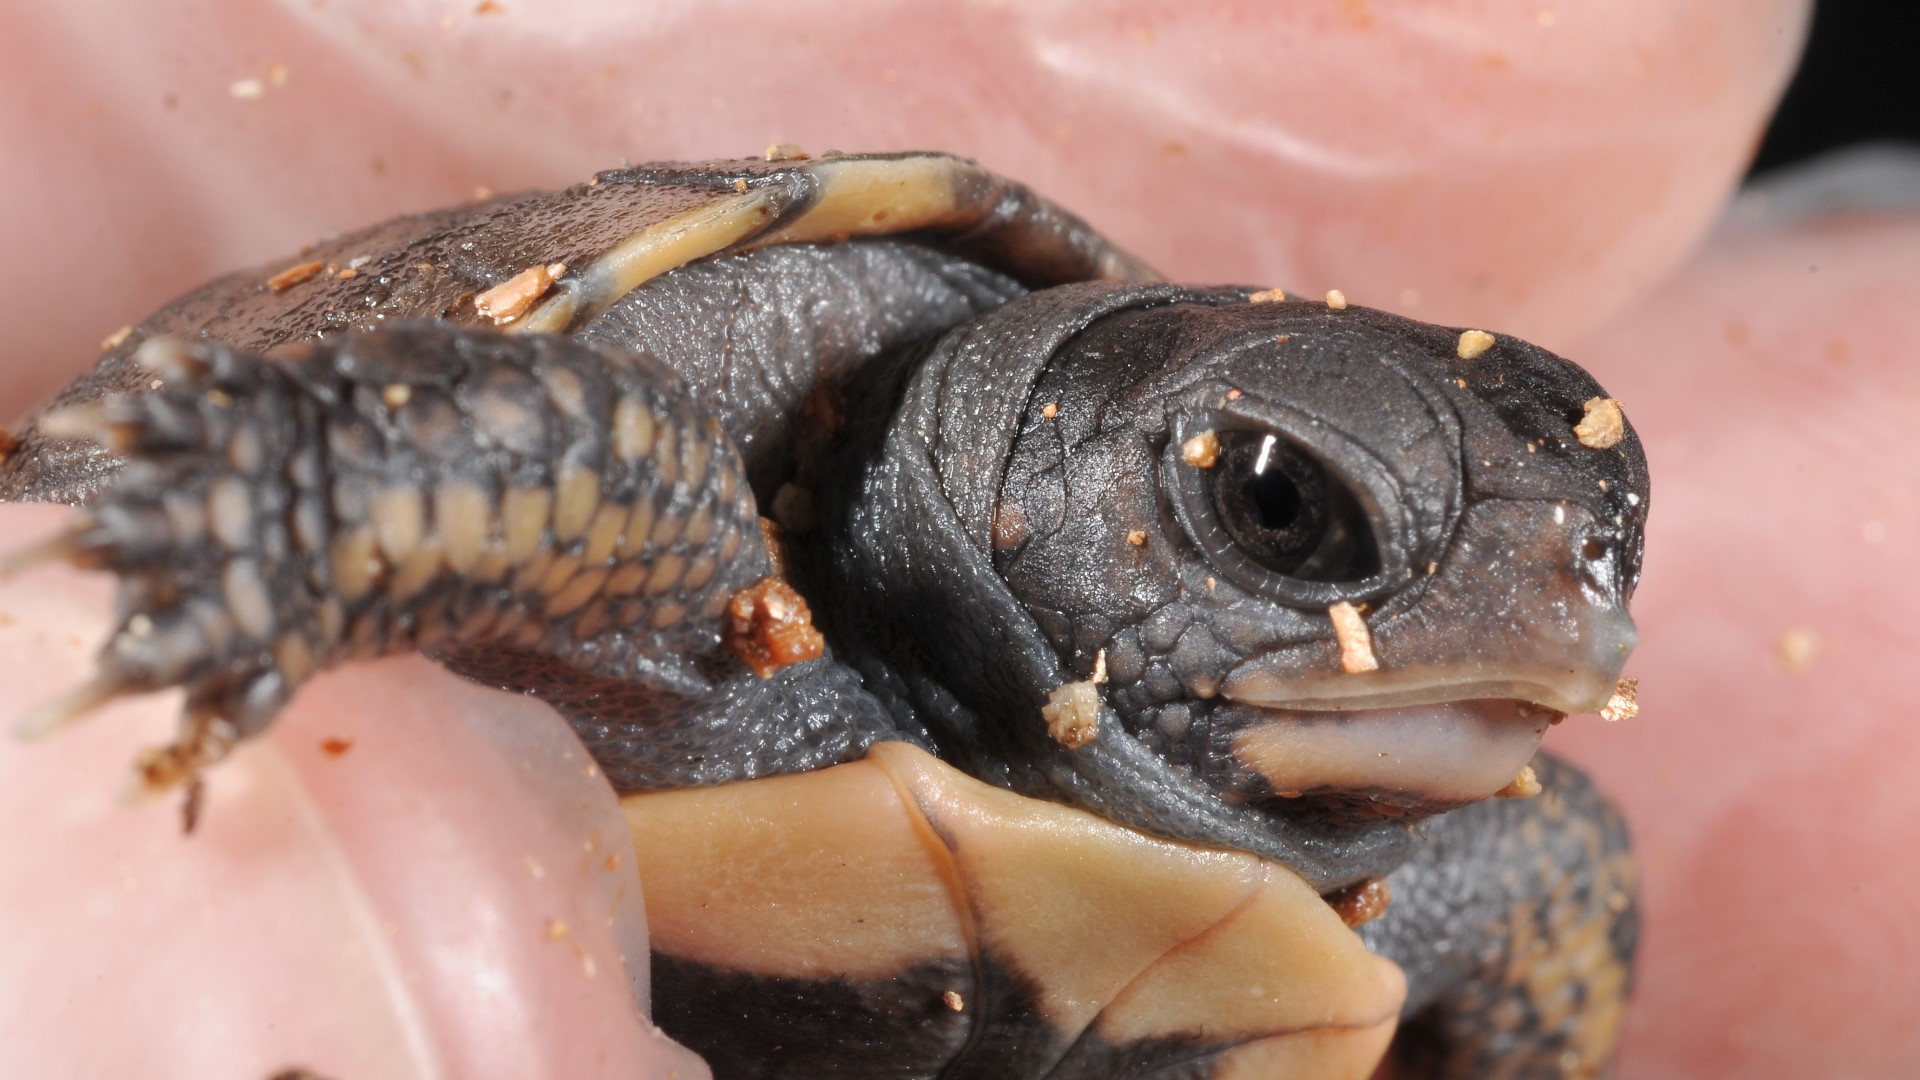 The 12 baby turtles at John Ball Zoo are currently hibernating and will be rereleased into the wild in the spring.